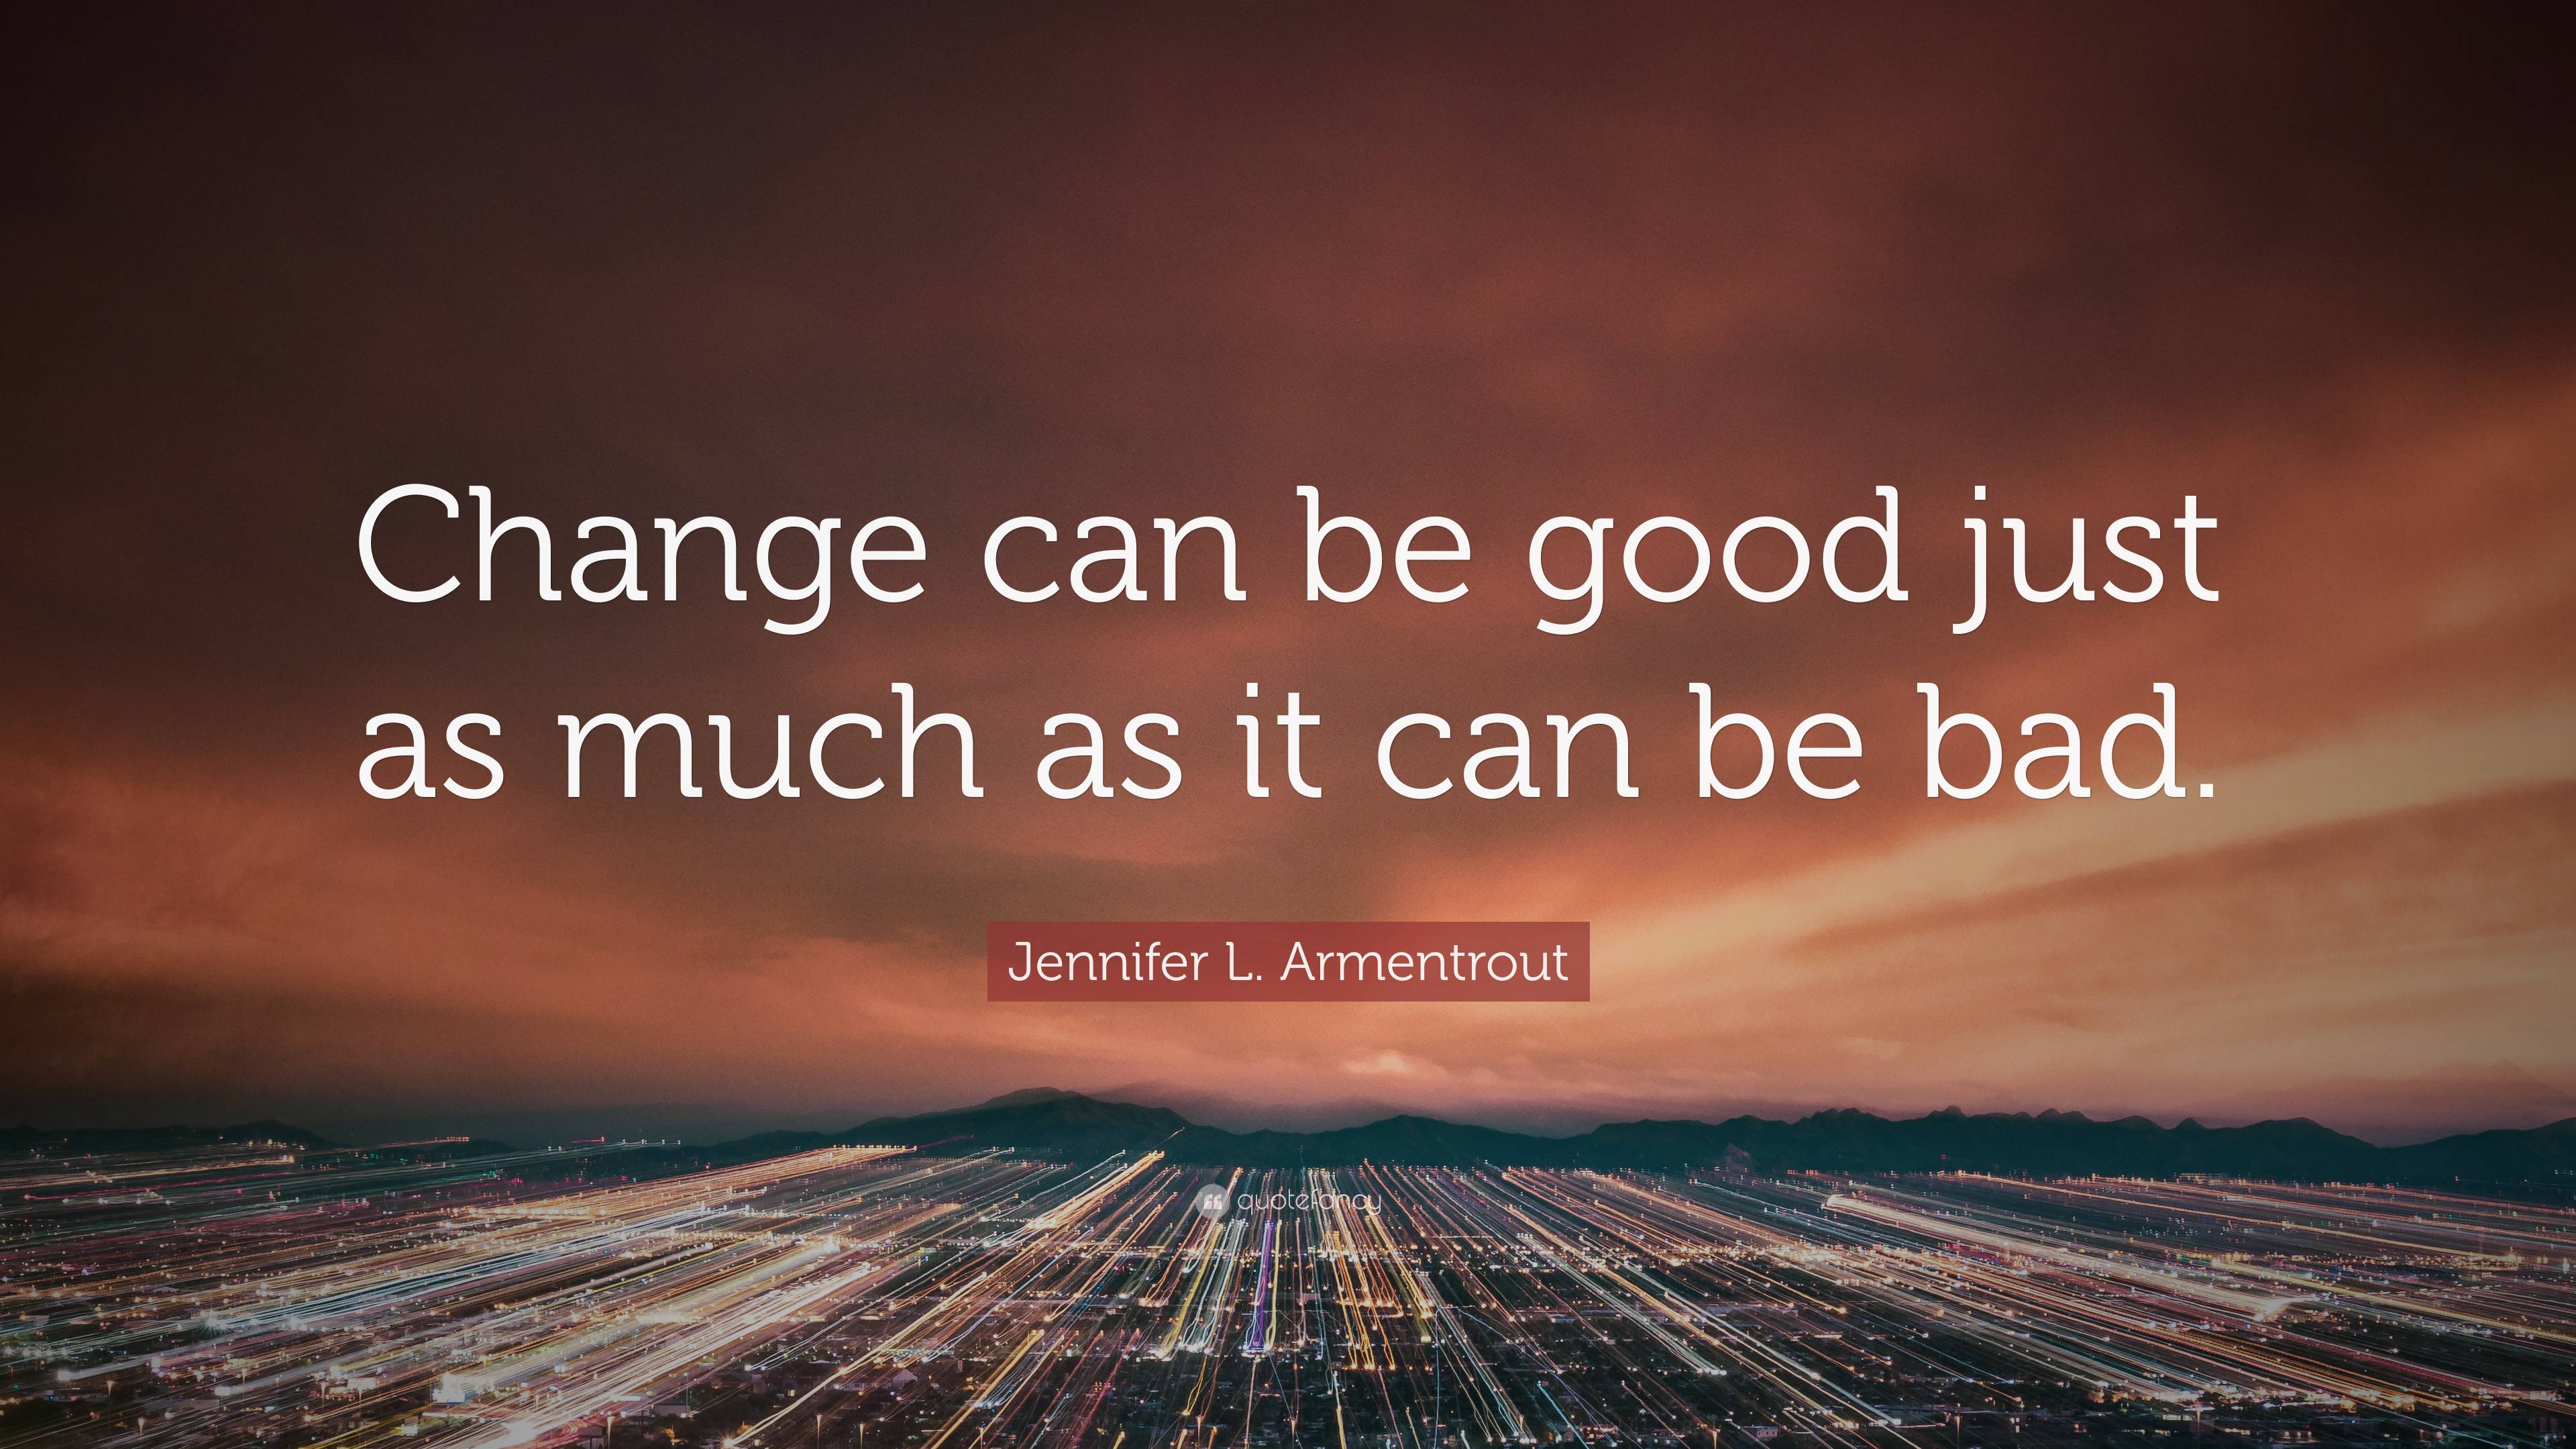 Jennifer L. Armentrout Quote: “Change can be good just as much as it ...